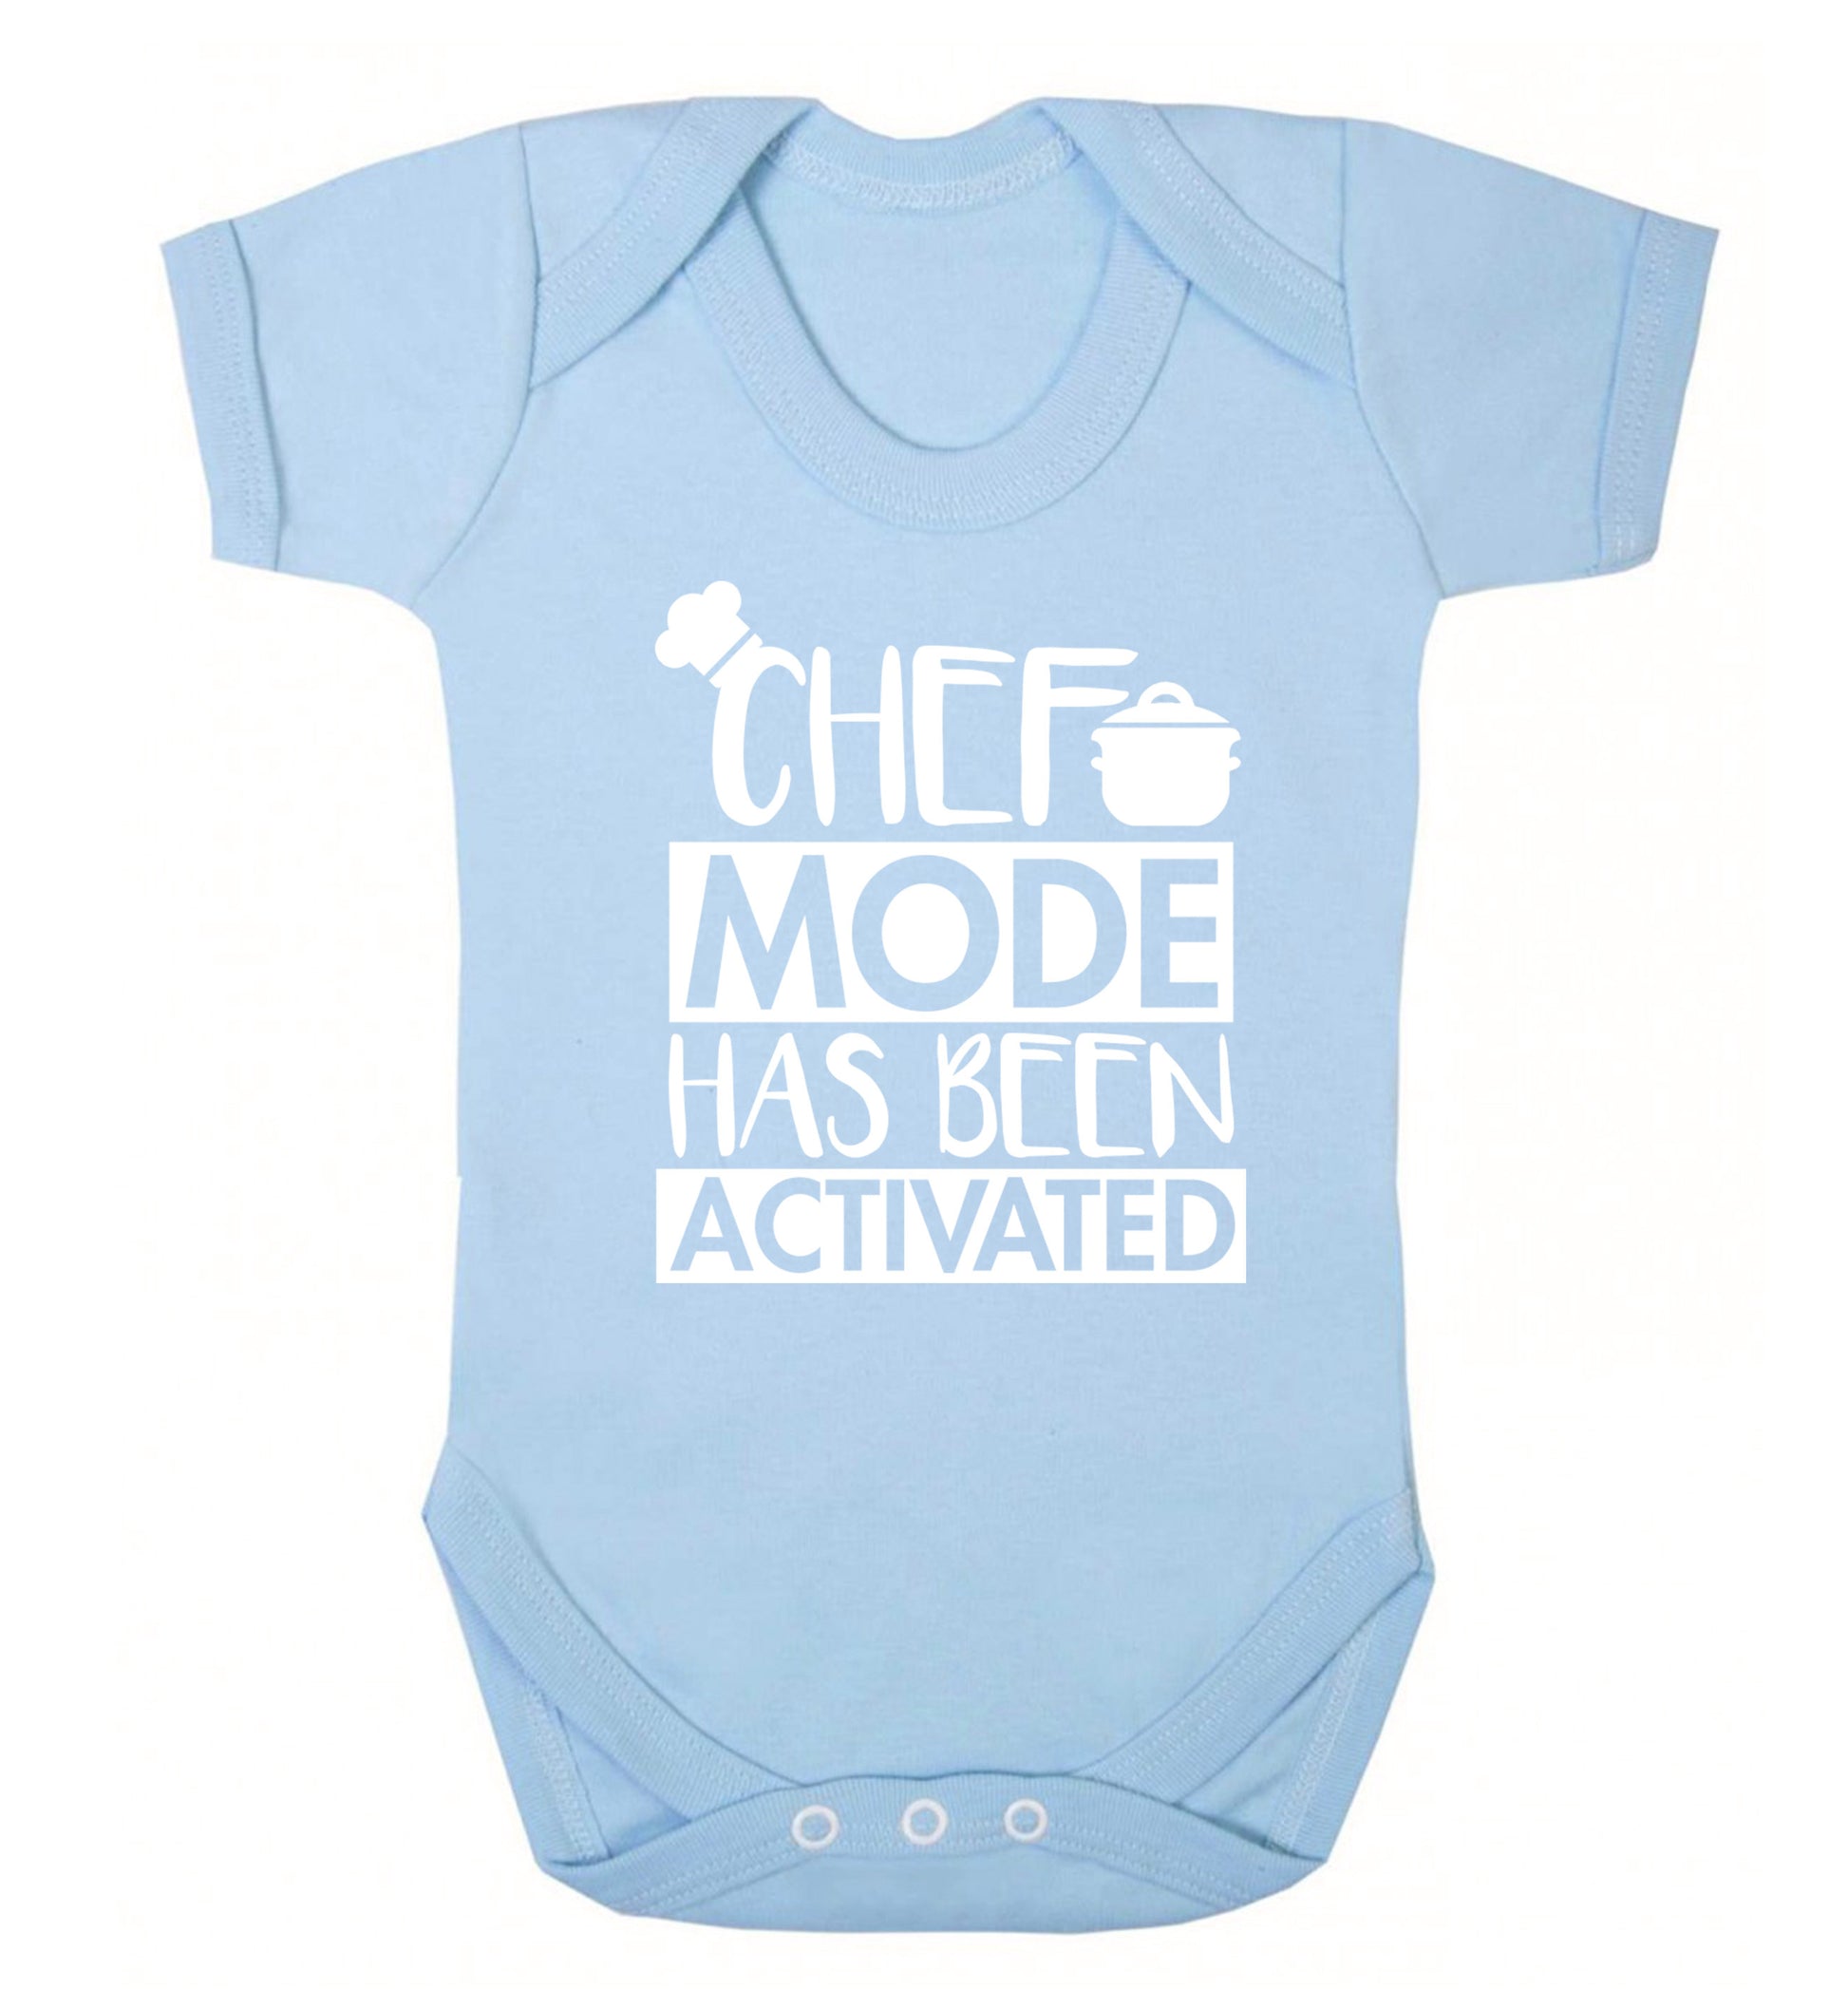 Chef mode has been activated Baby Vest pale blue 18-24 months